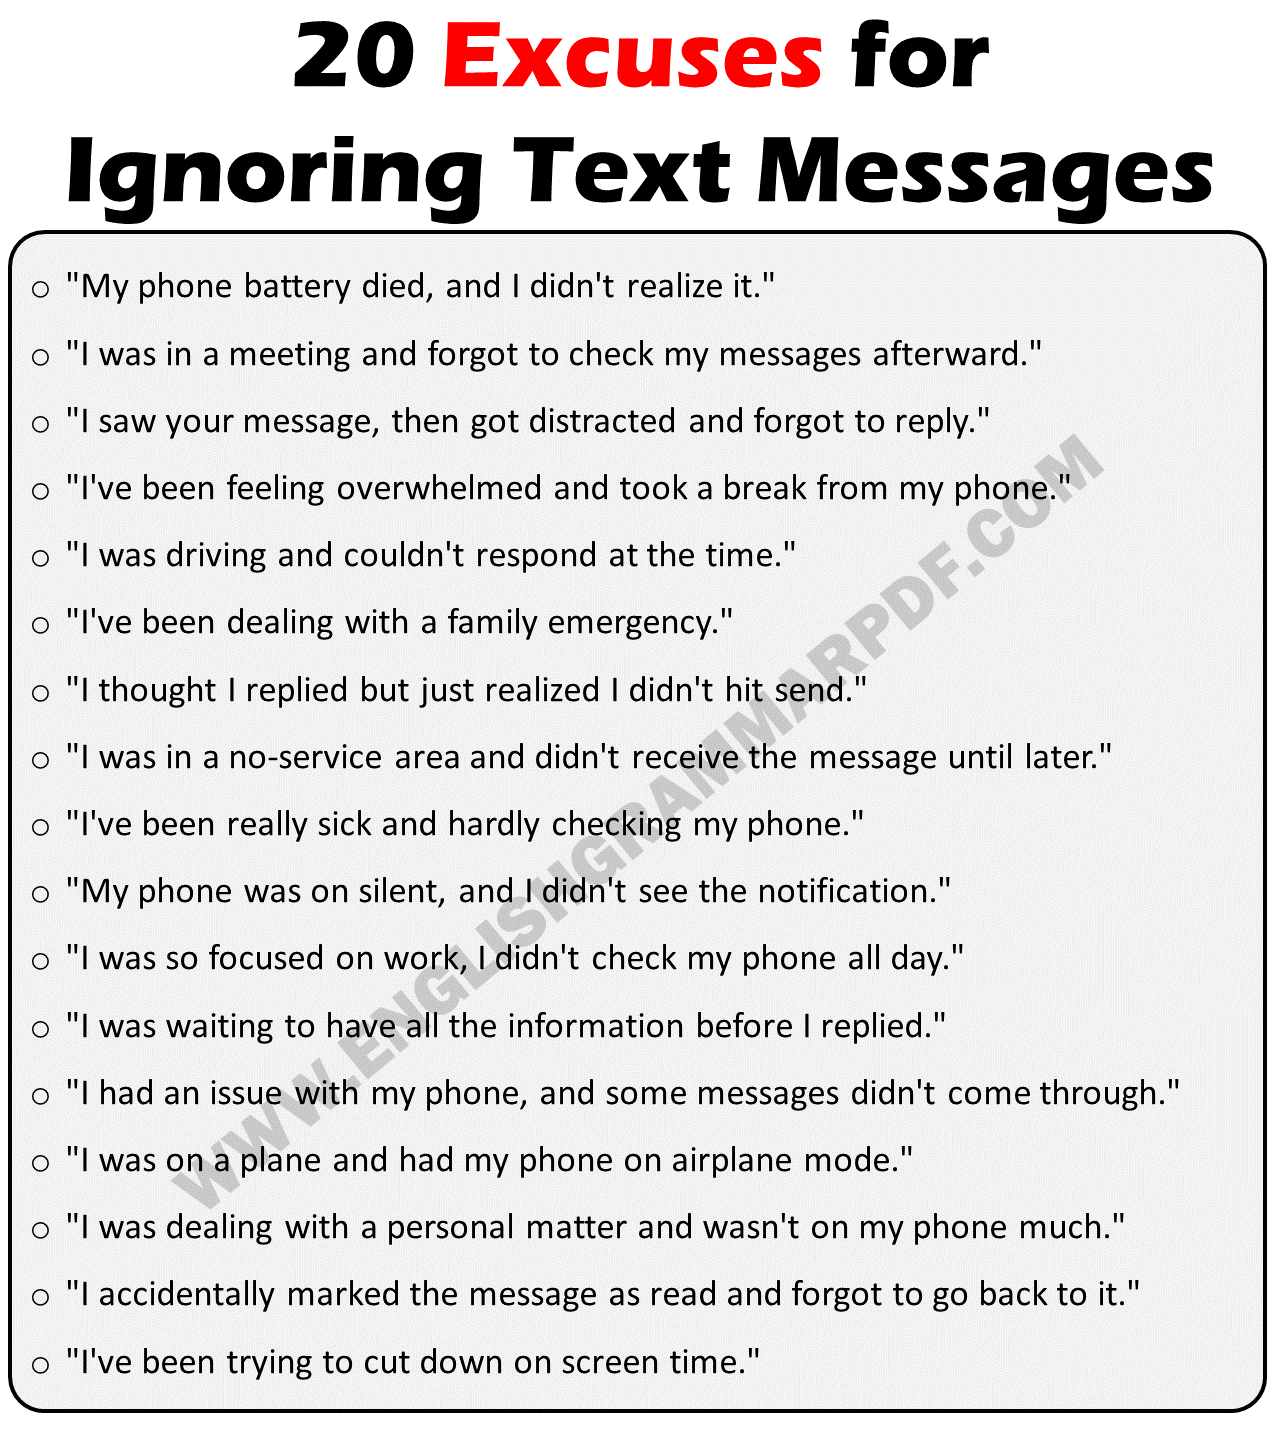 Excuses For Ignoring Text Messages